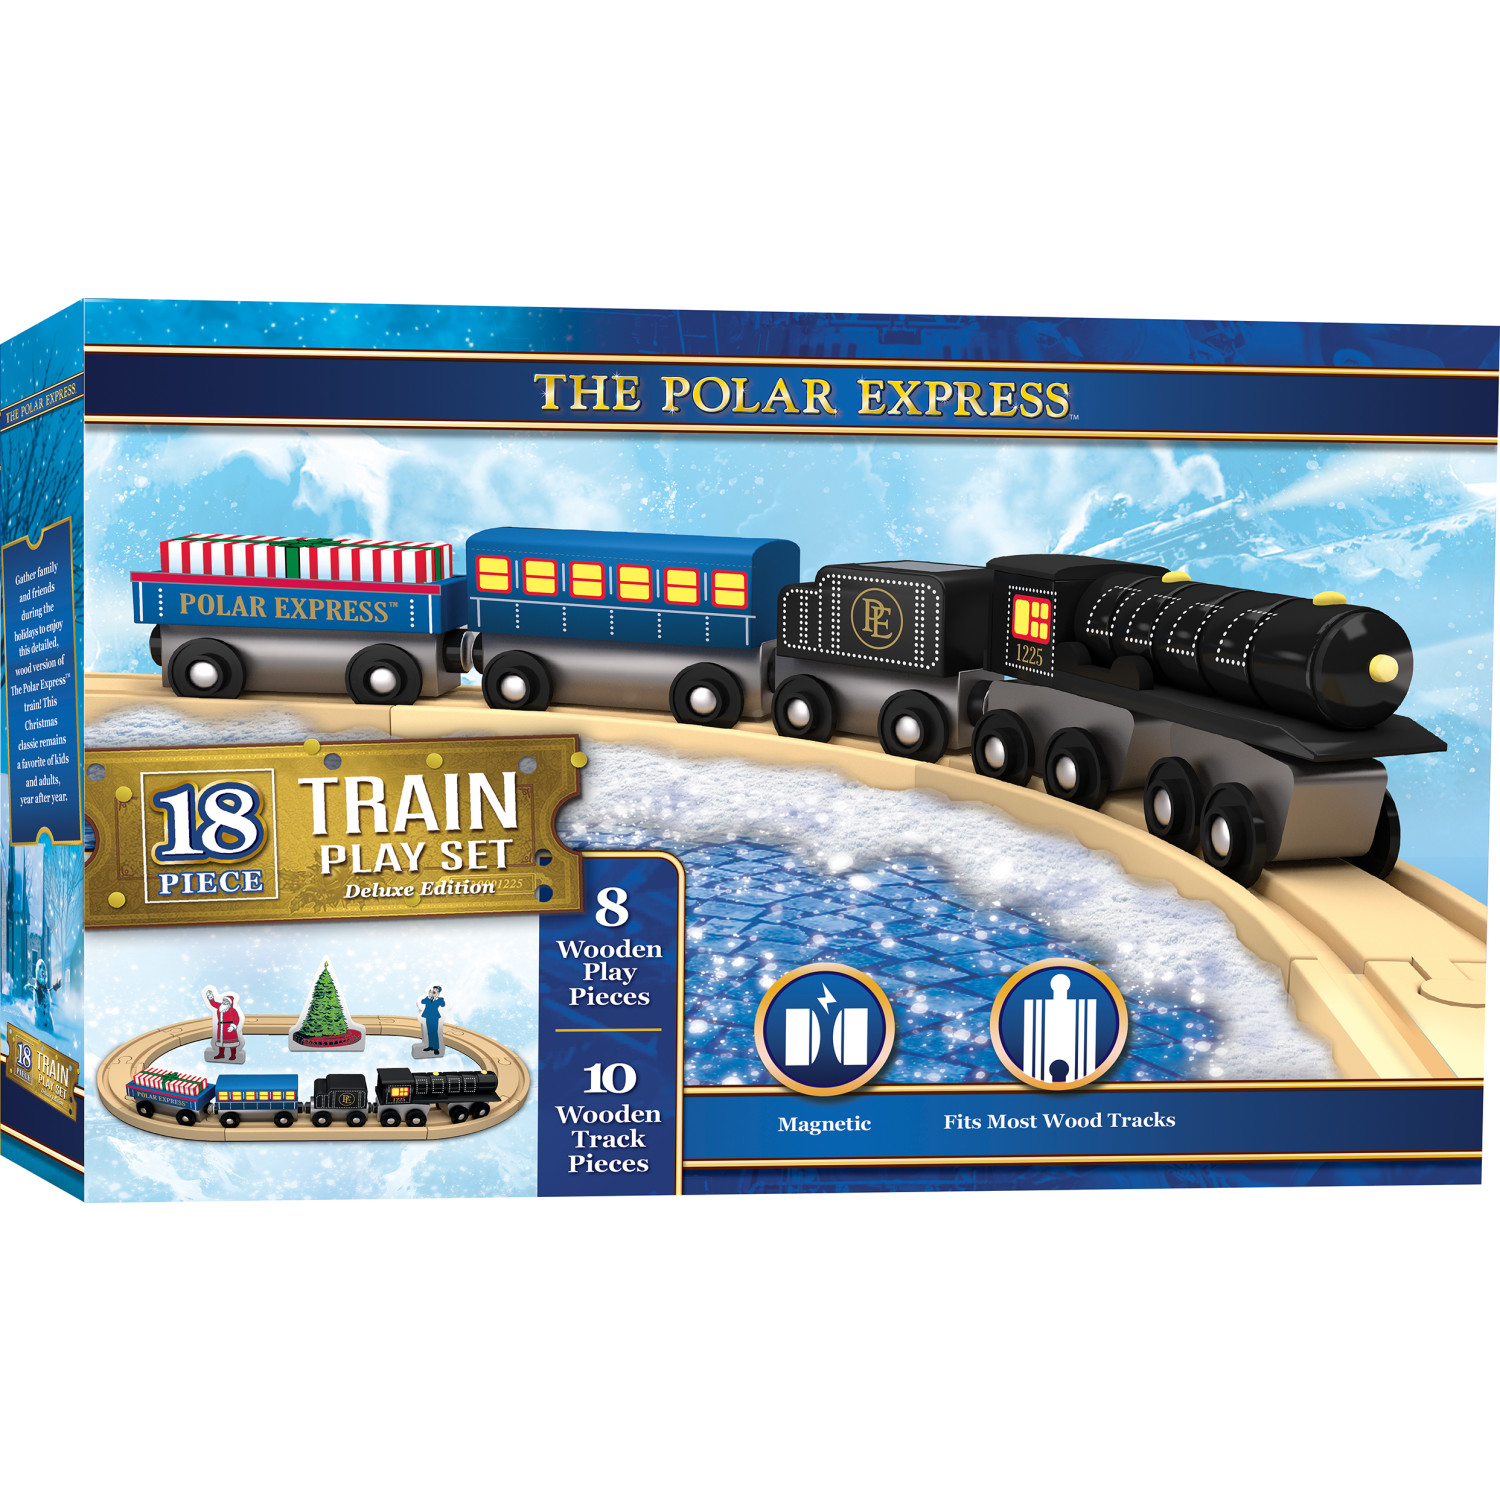 MasterPieces Wood Train Sets - The Polar Express 18 Piece Train Set - image 2 of 4